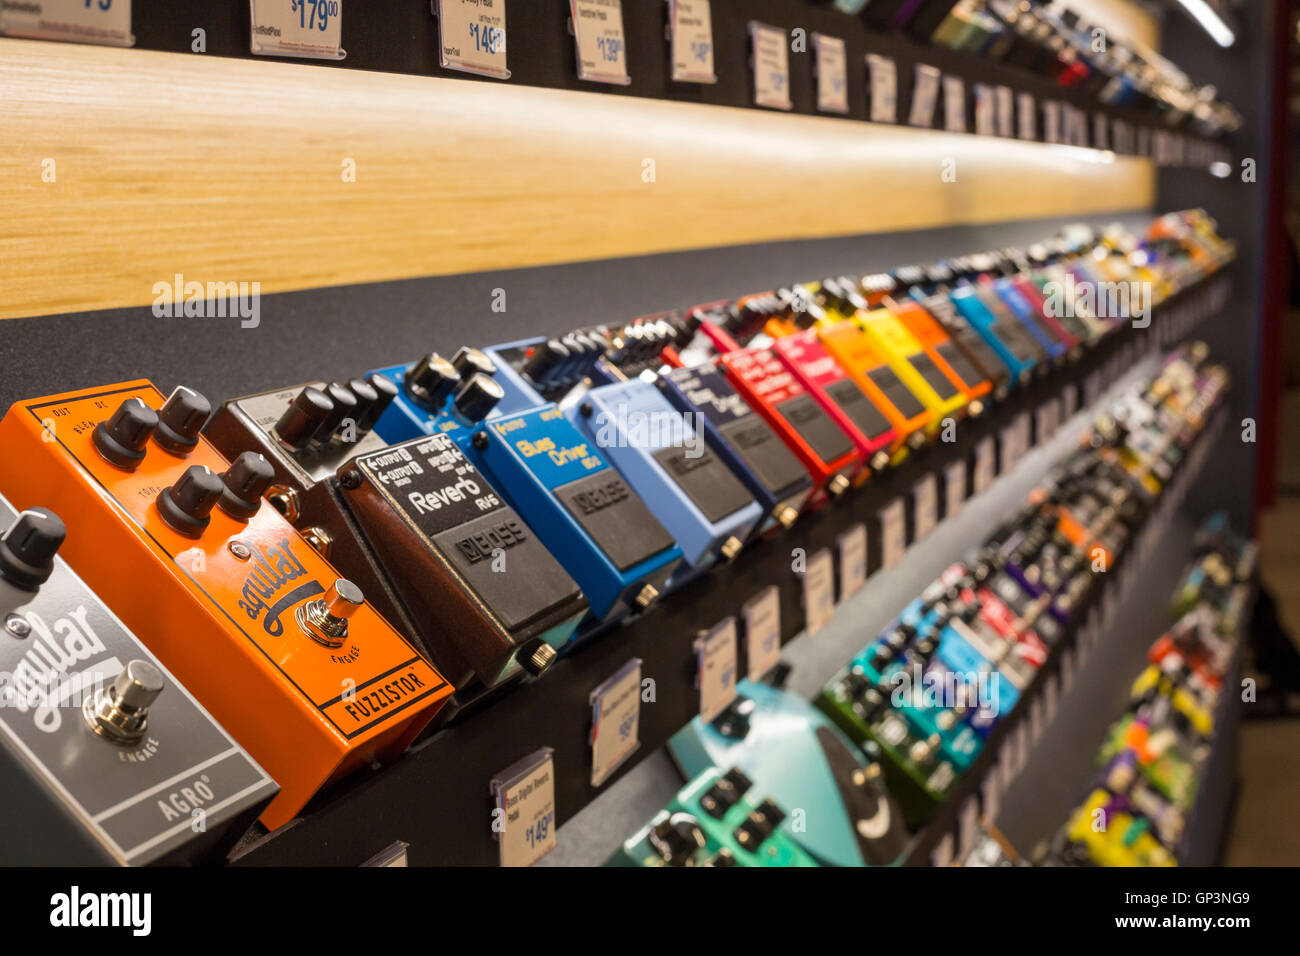 Fort Wayne, Indiana - Effects pedals for electronic musical instruments on sale at the Sweetwater Music store. Stock Photo